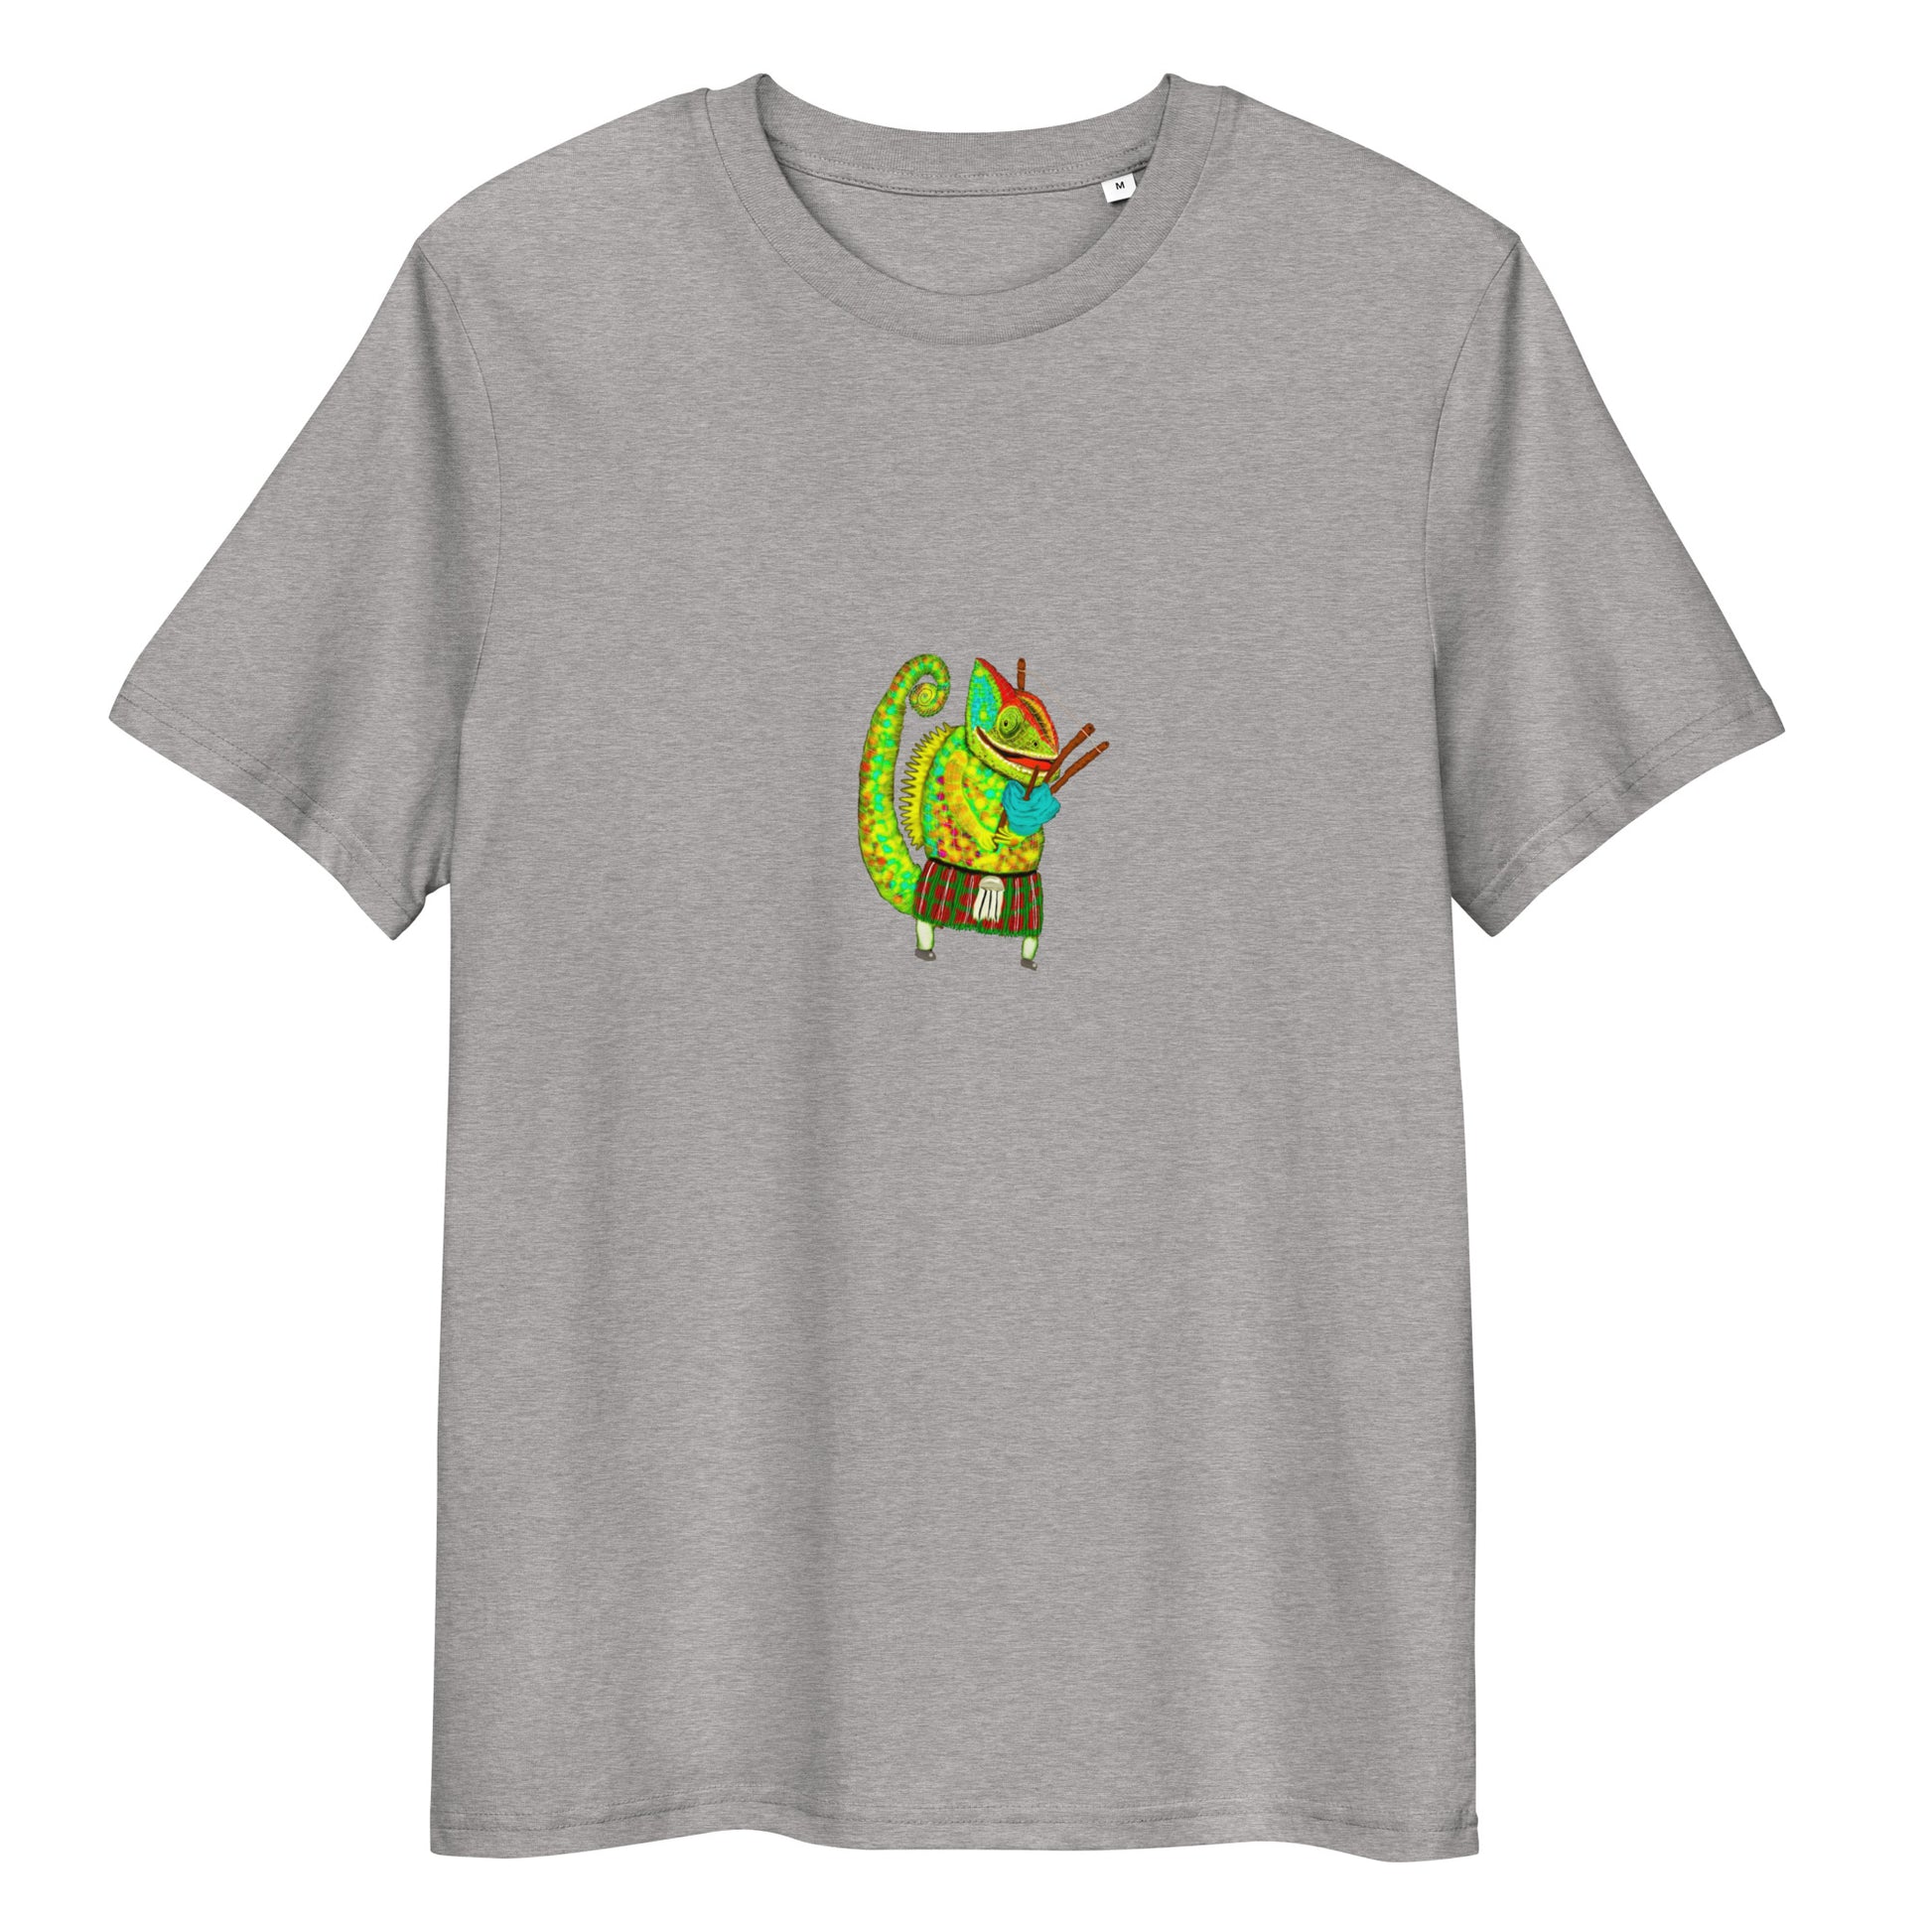 Bagpiper Chameleon | 100% Organic Cotton T Shirt in heather grey